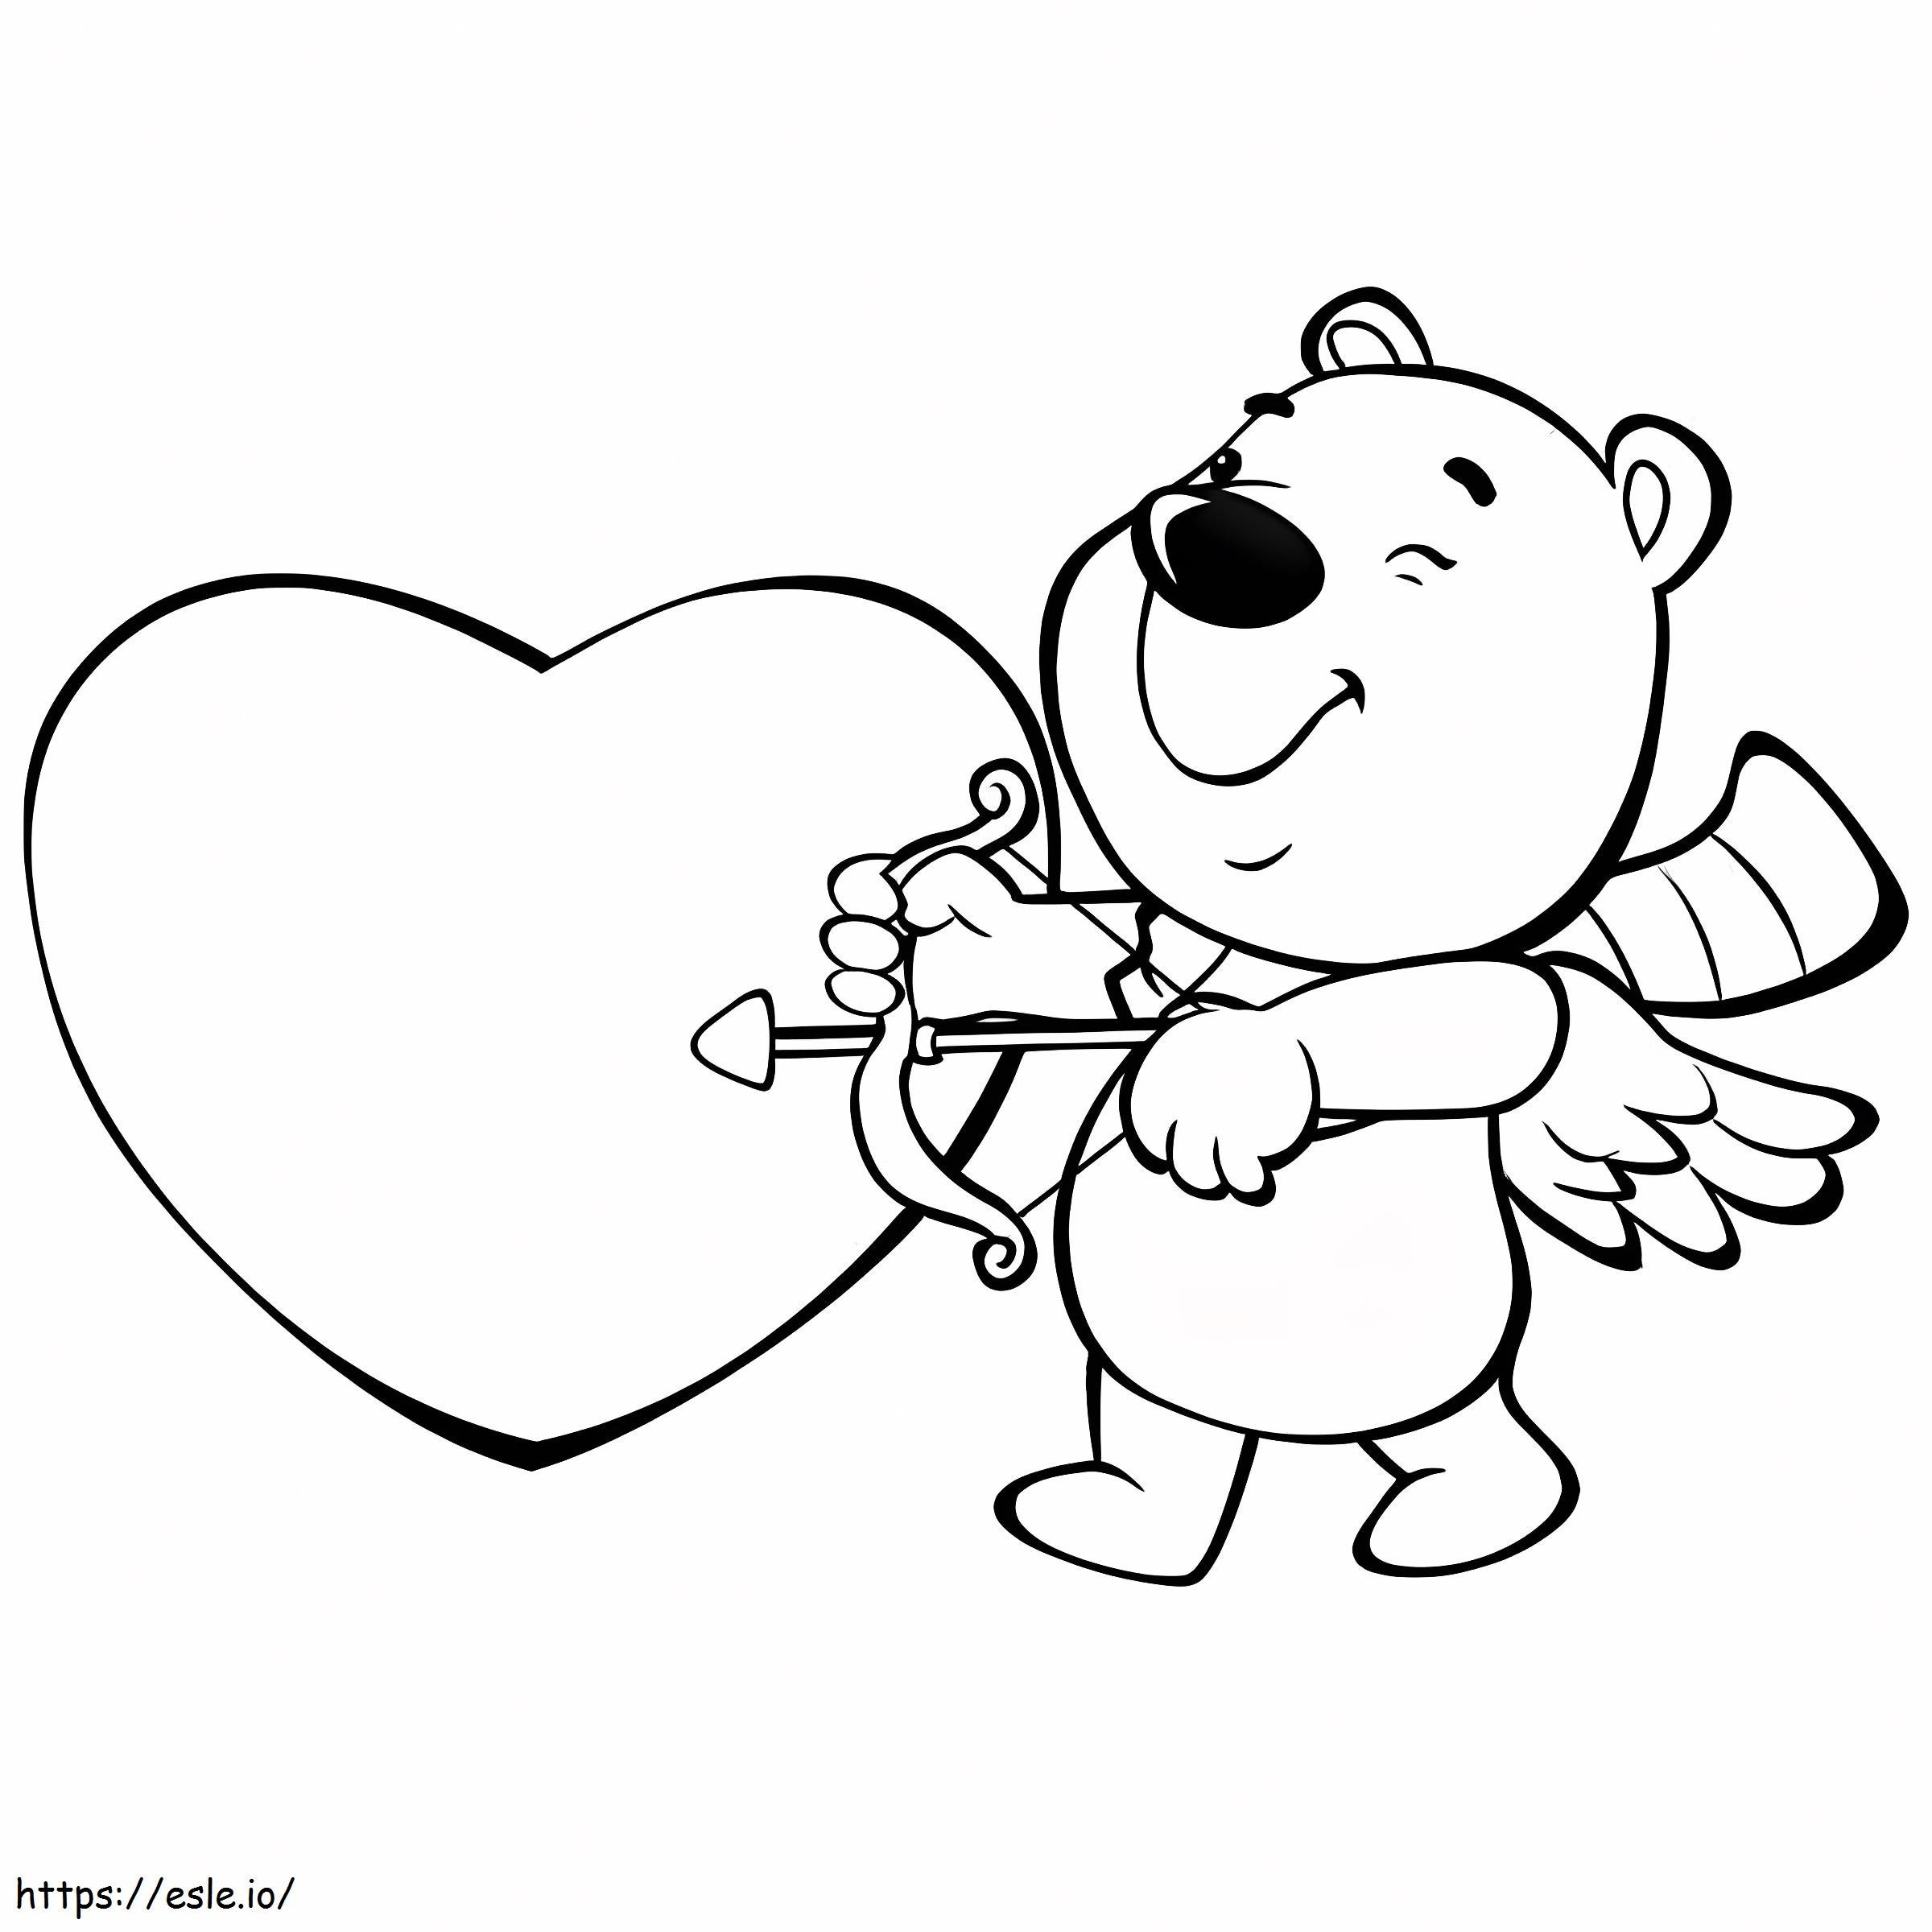 Little Cupid Bear coloring page